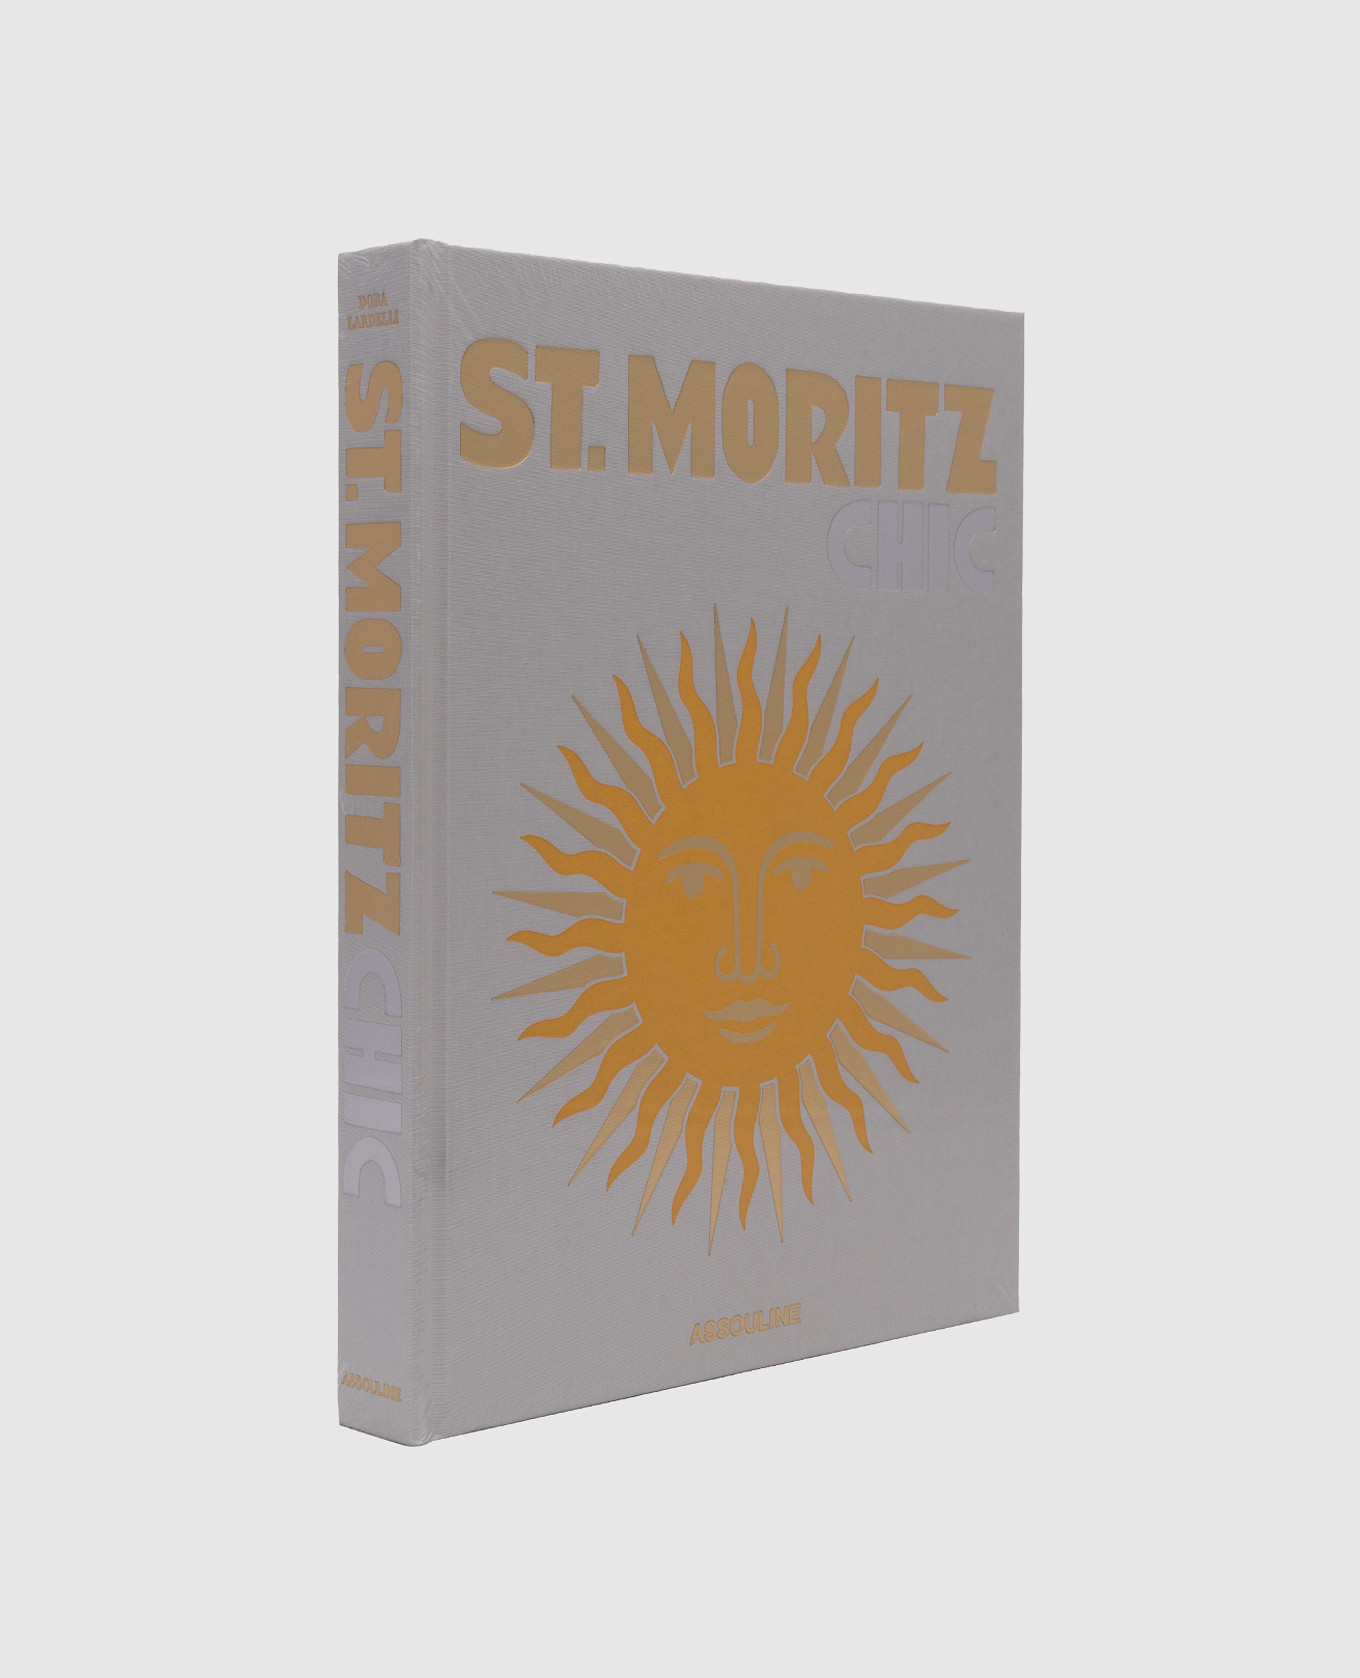 The book of St. Moritz Chic